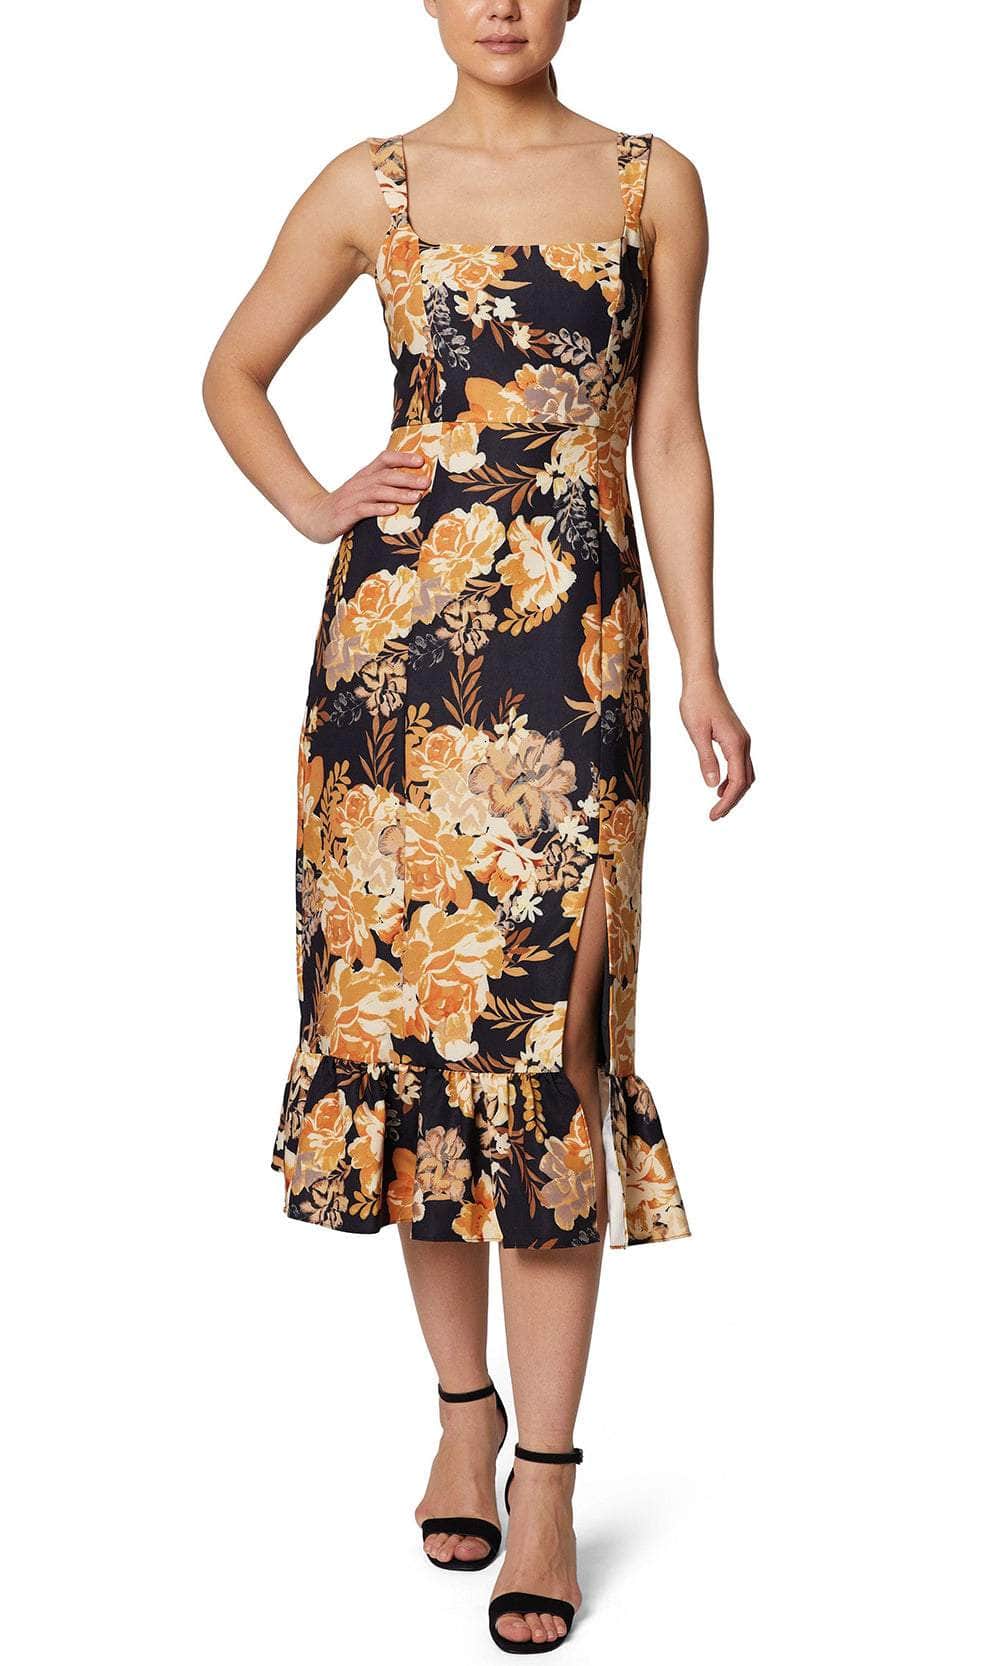 Laundry HU07D18 - Sleeveless Floral Casual Dress Cocktail Dresses 2 / Floral Bouquet